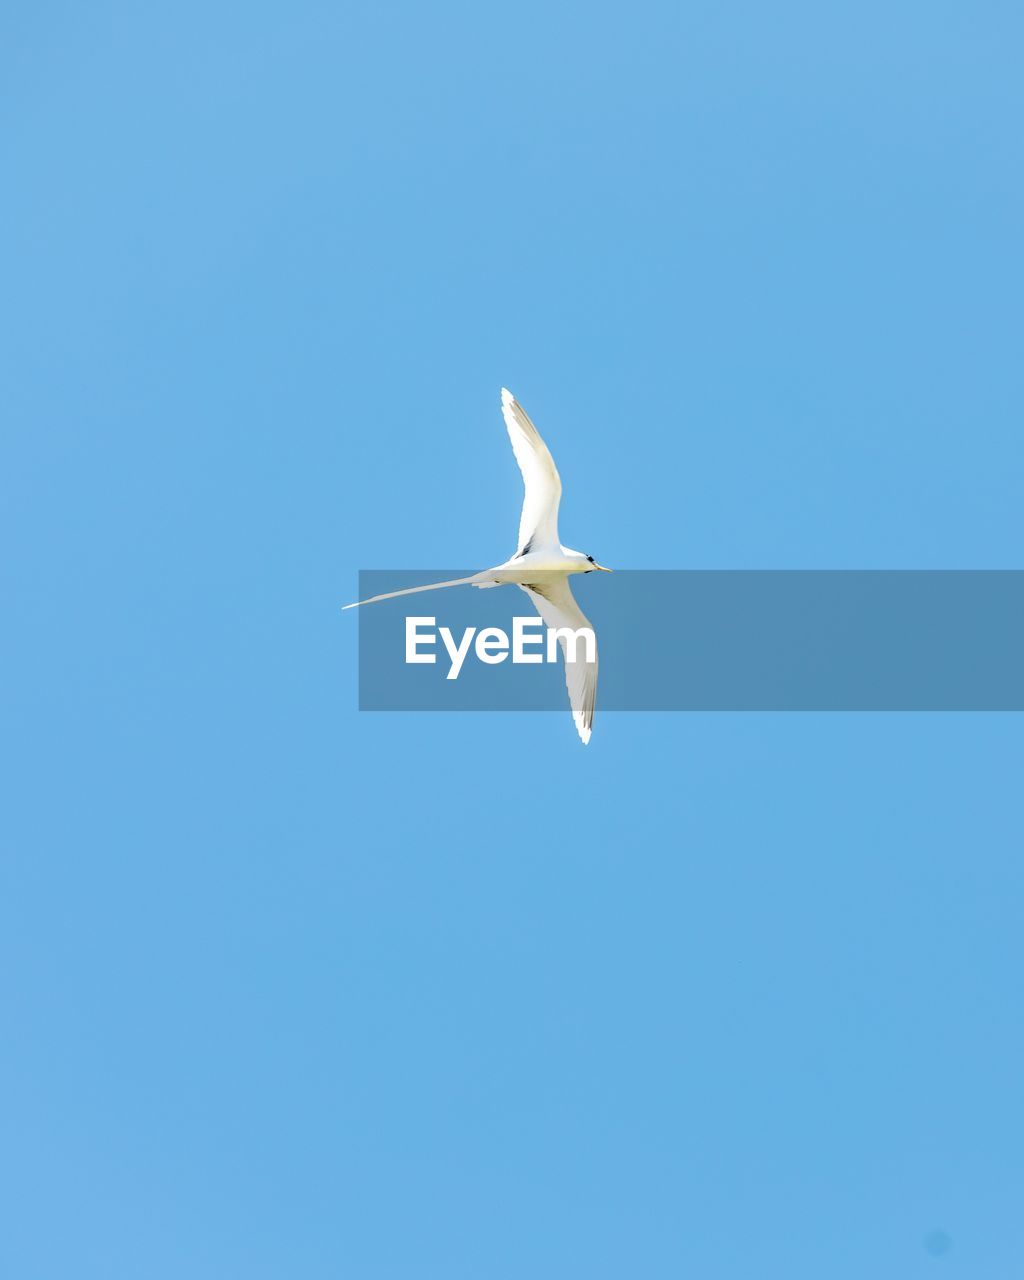 SEAGULL FLYING IN THE SKY